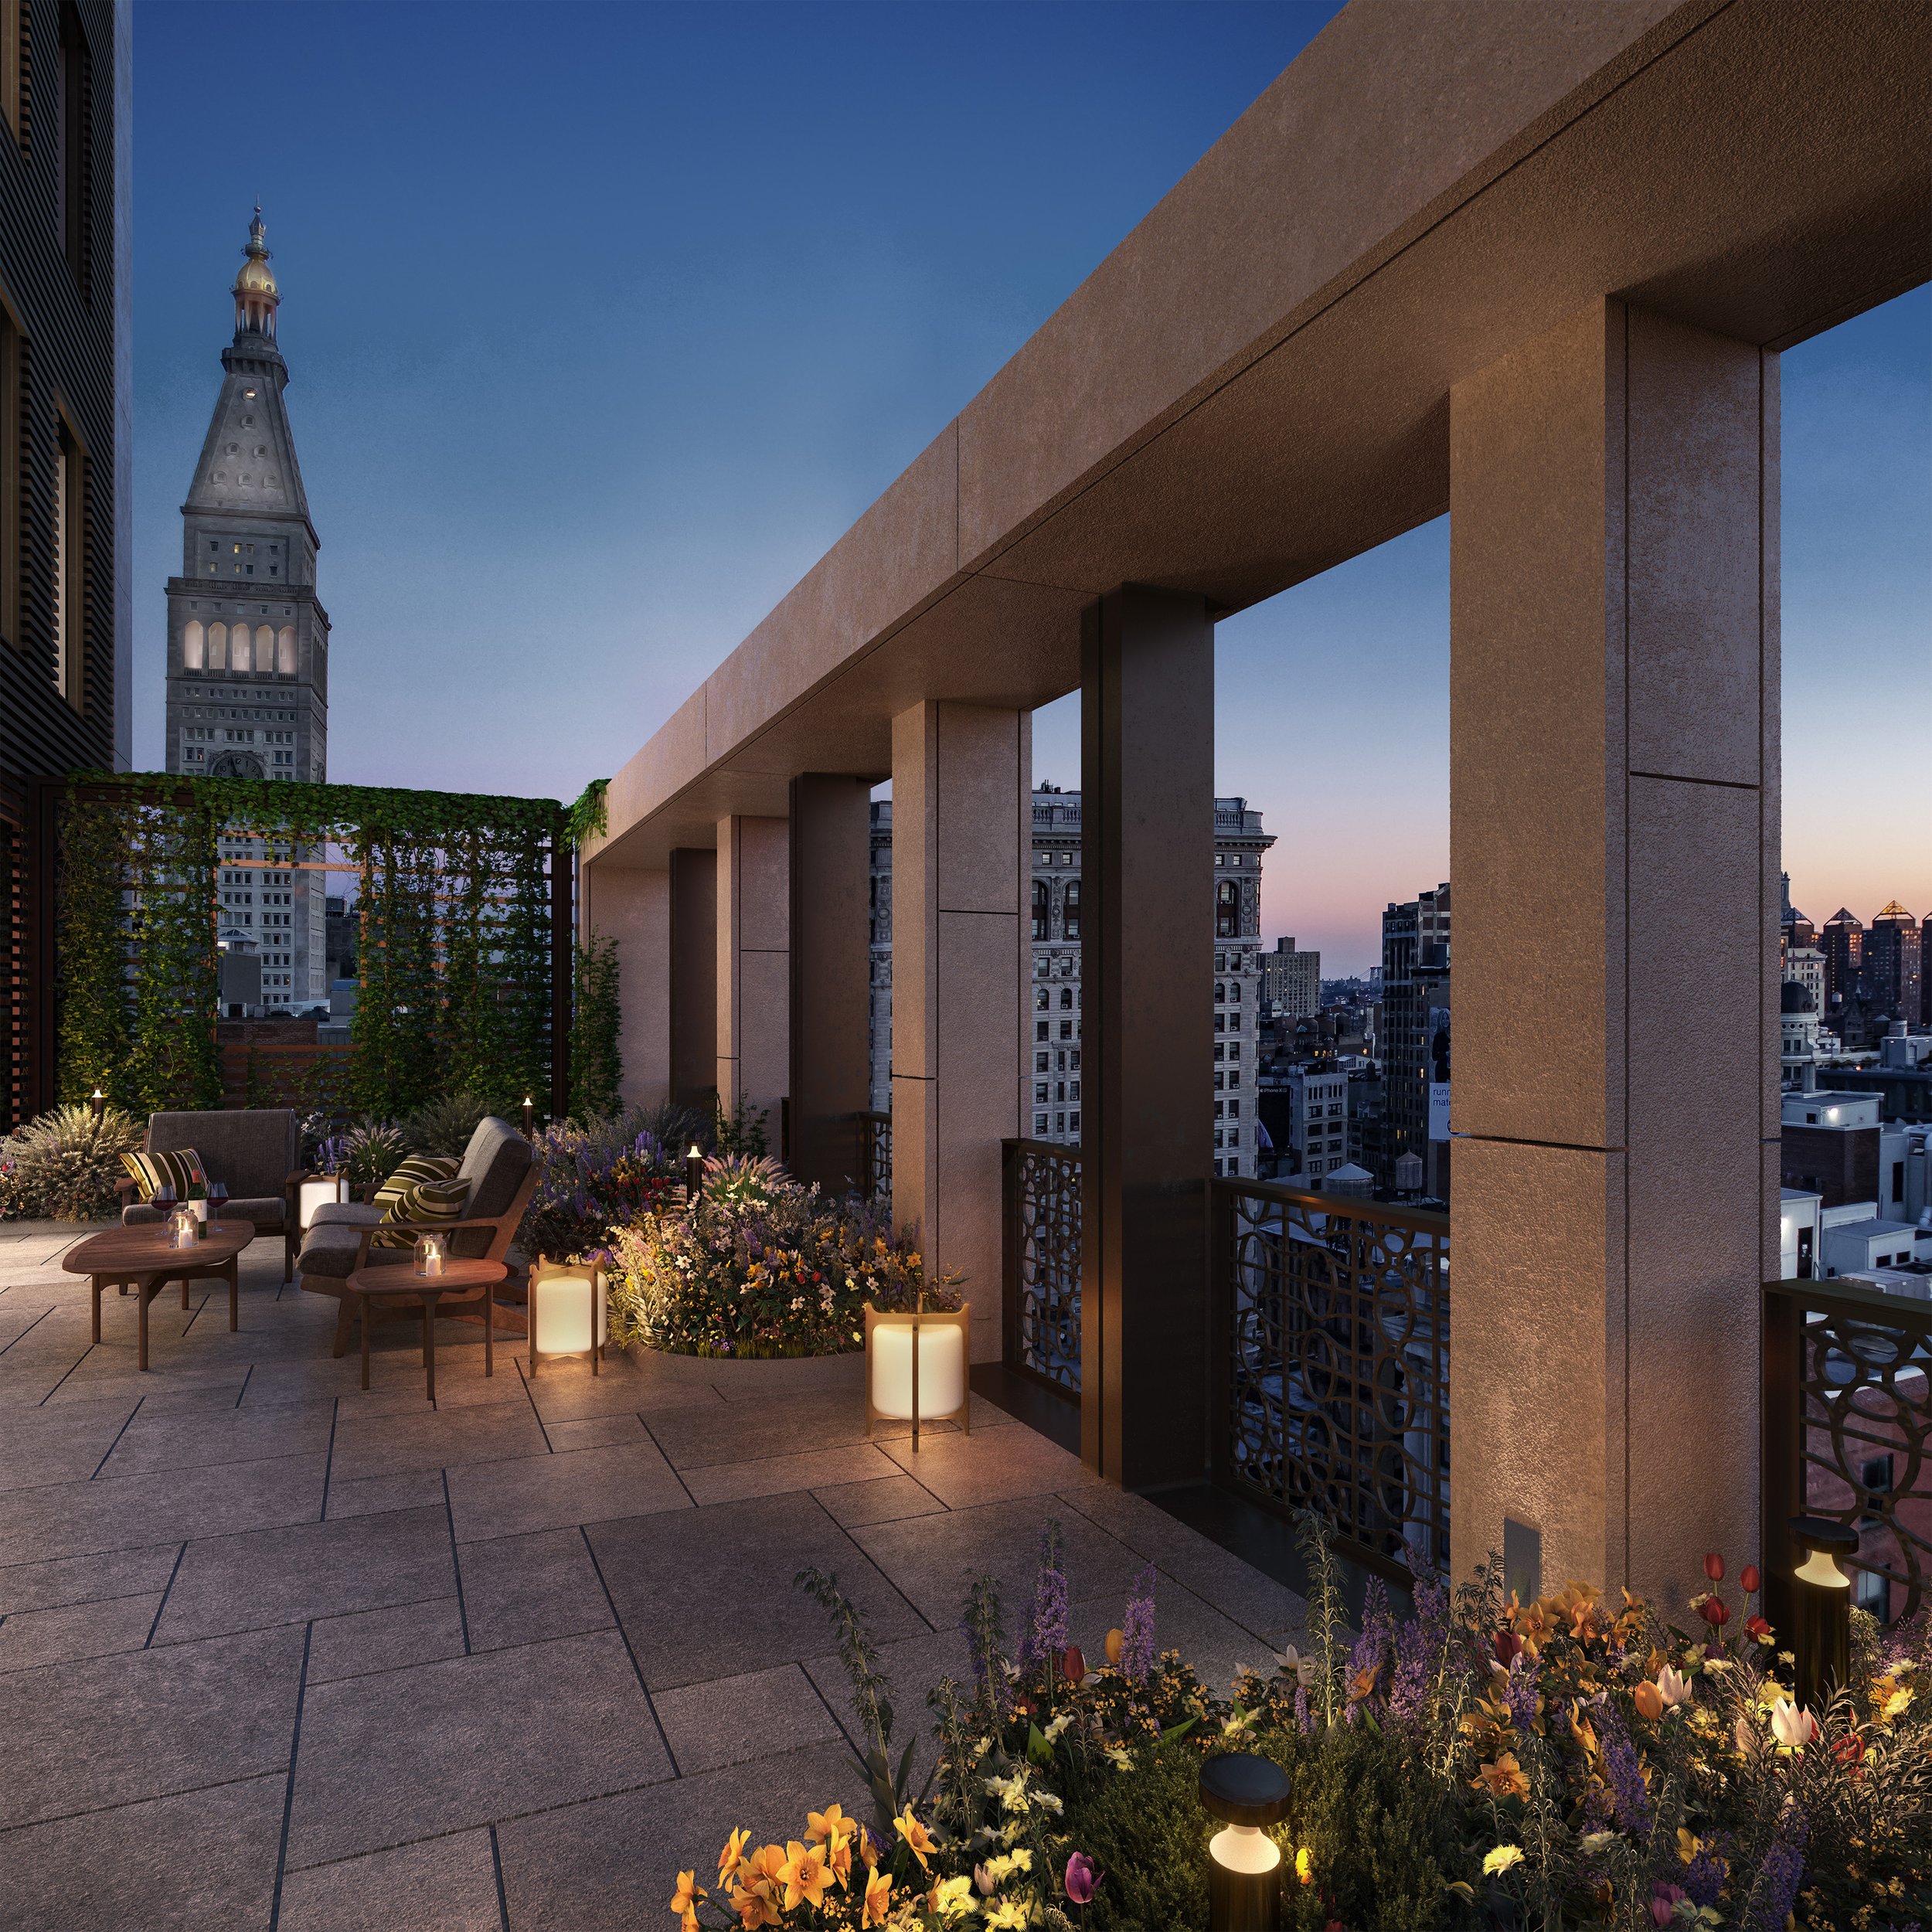  “We worked closely with COOKFOX Architects to ensure the residences at Flatiron House featured spacious floor plans with a direct connection to the outdoors and nature. Our collaboration resulted in a wide array of serene landscaped spaces that are 